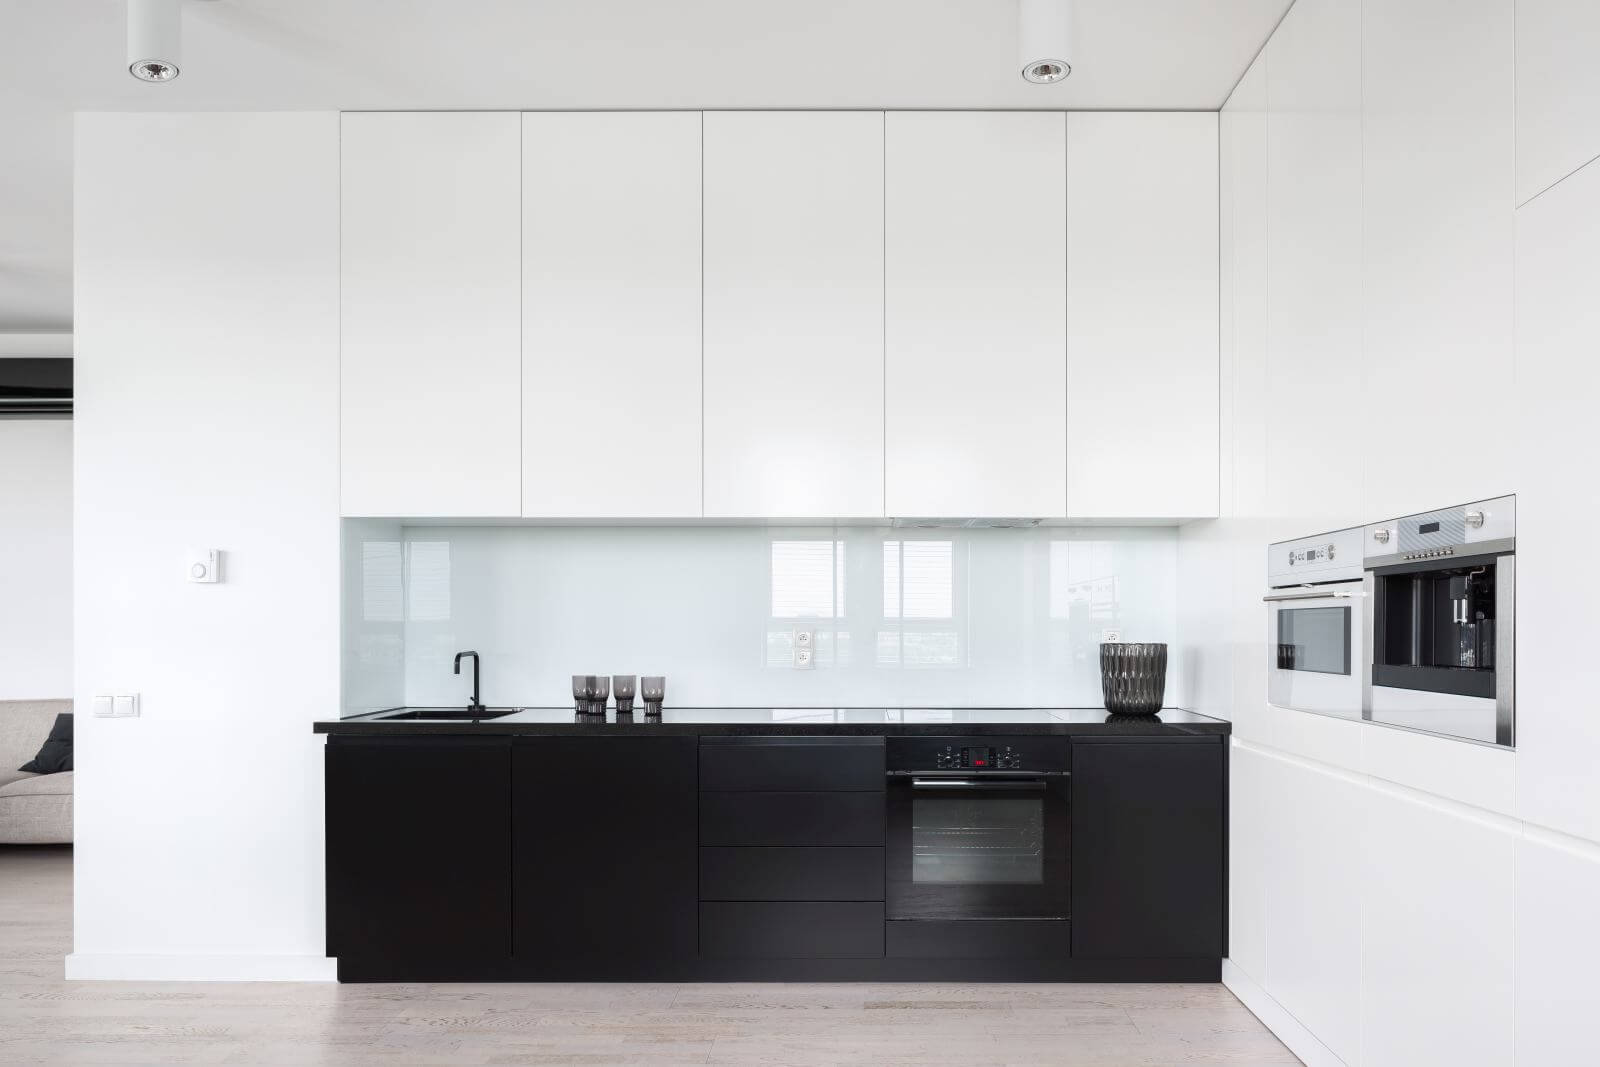 Modern and simple designed kitchen interior in black and white